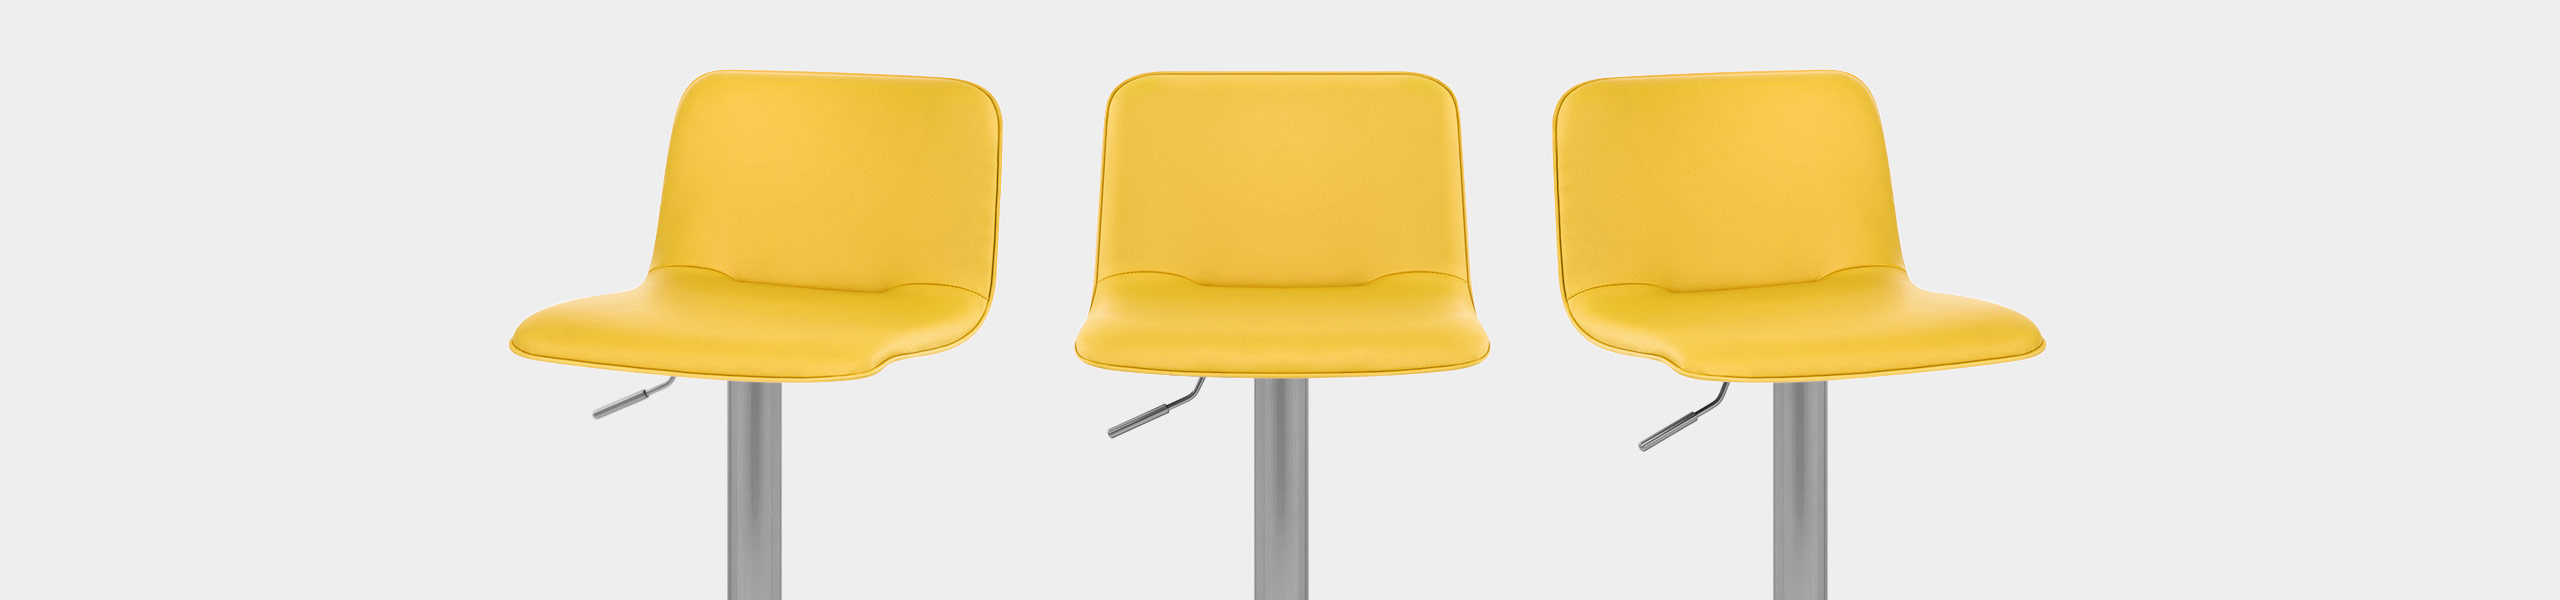 Cape Brushed Steel Stool Yellow Video Banner